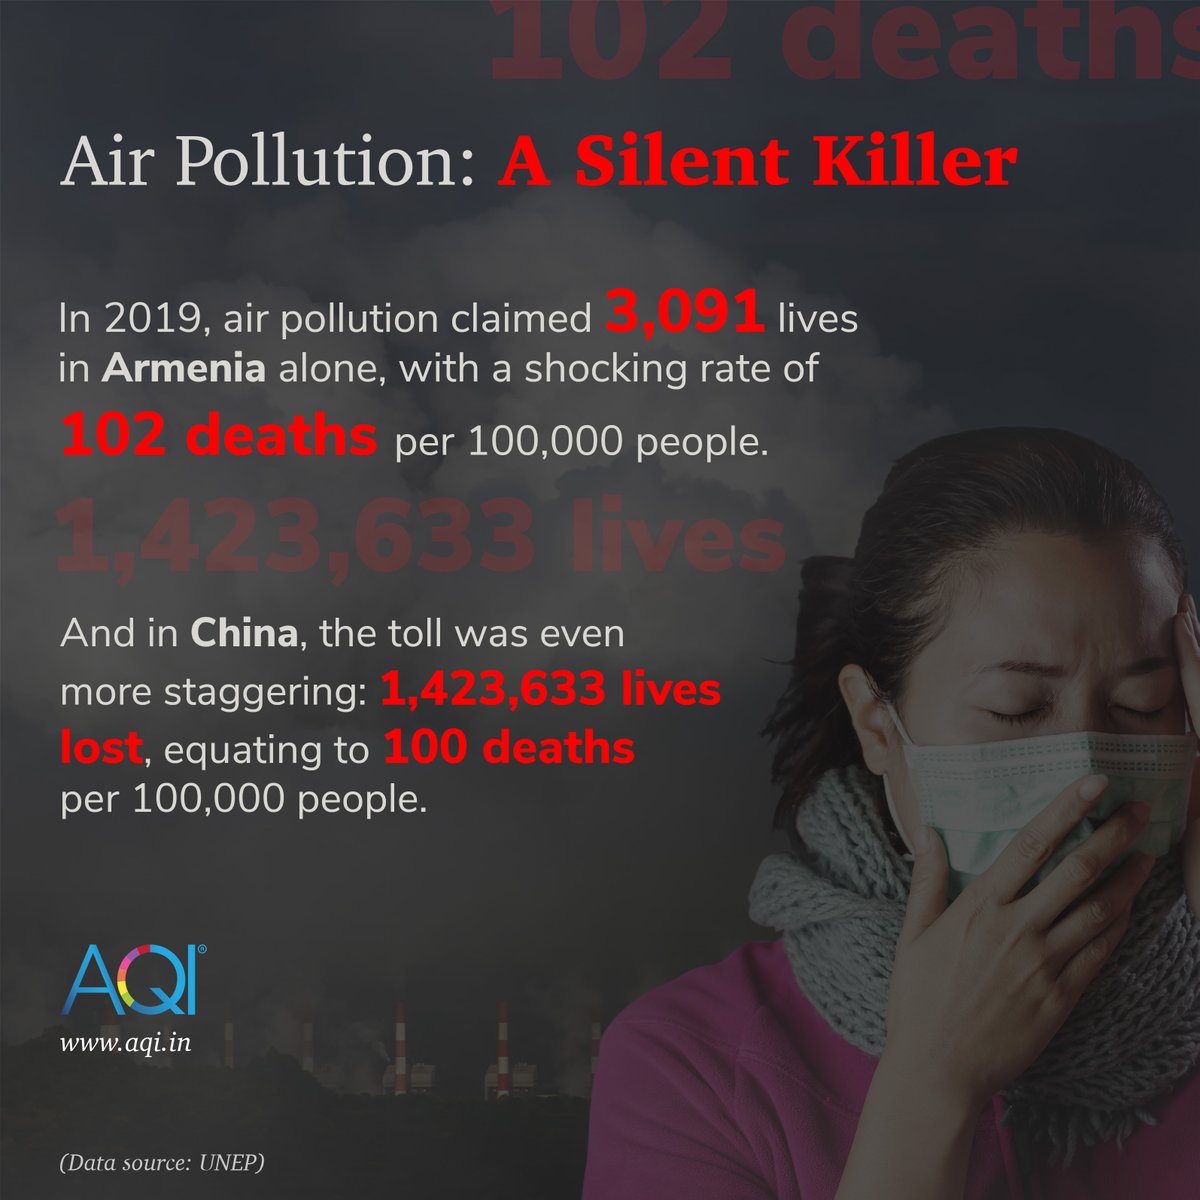 Why are we underestimating the deadly grip of air pollution? It's time to wake up to the reality that this silent killer is claiming thousands of lives each year. #WakeUp #Health #ActNow #Global #China #Armenian #AirQuality #Airpollution #globalhealth #action